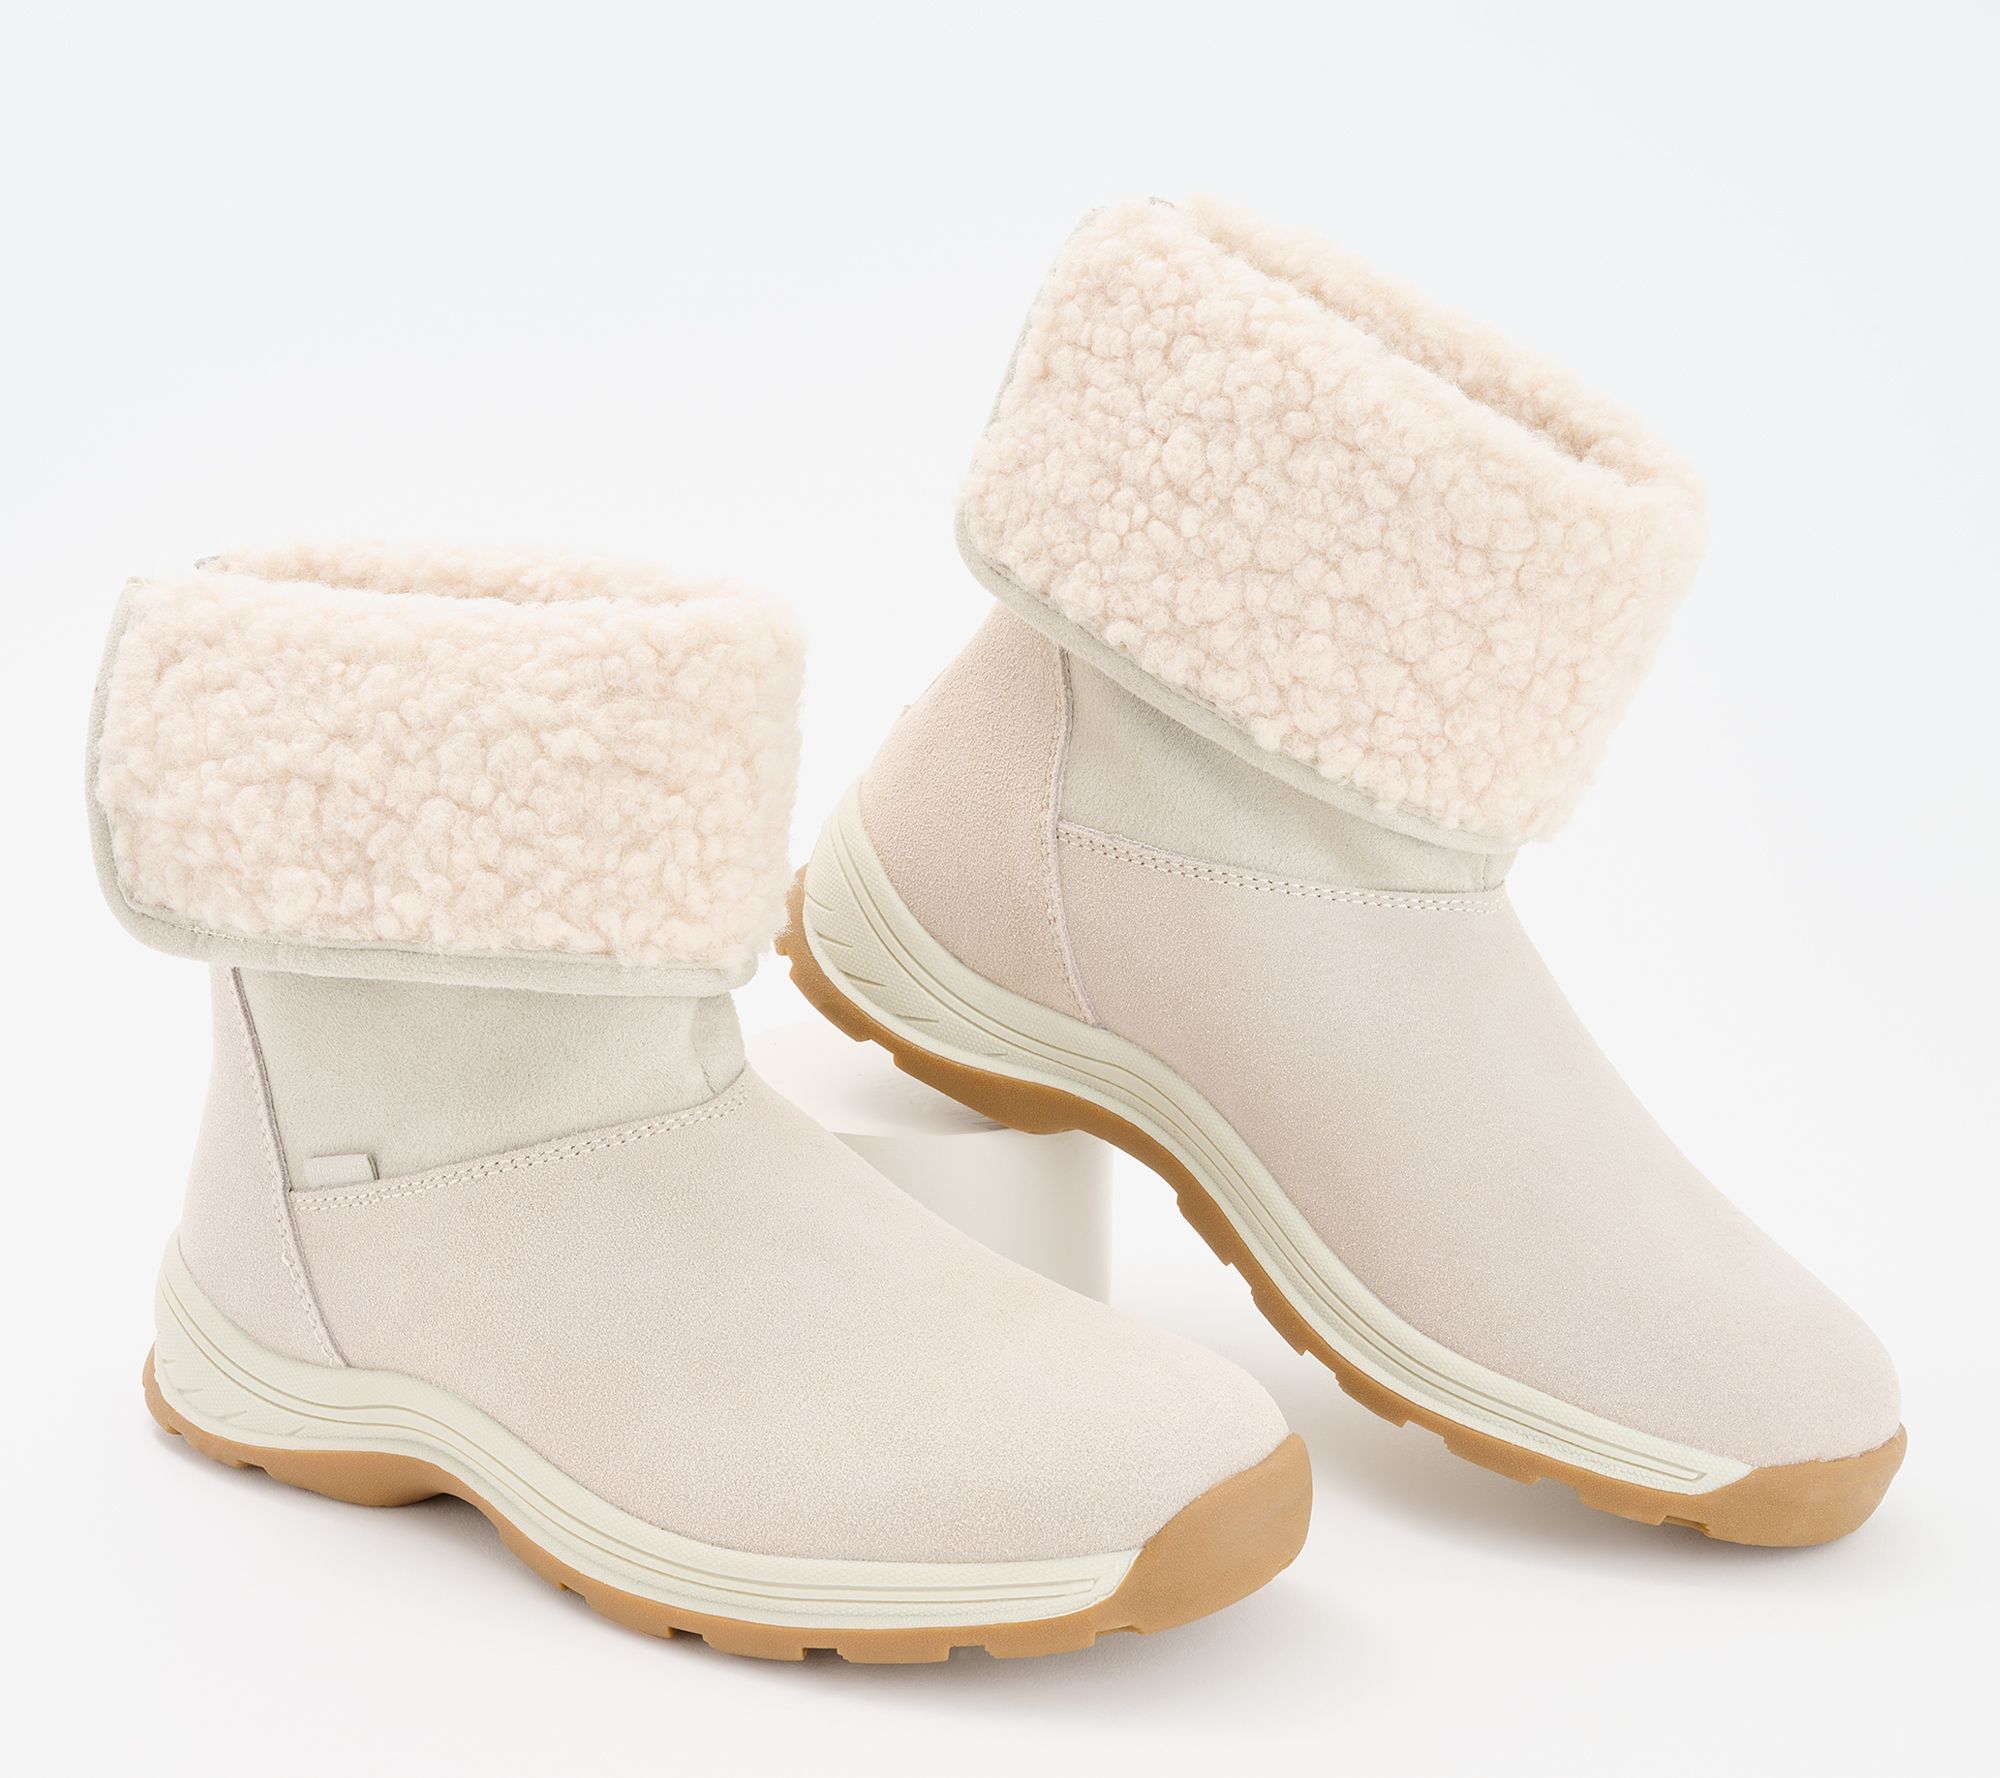 QVC sale: Save up to 50% on boots and outerwear for the holidays